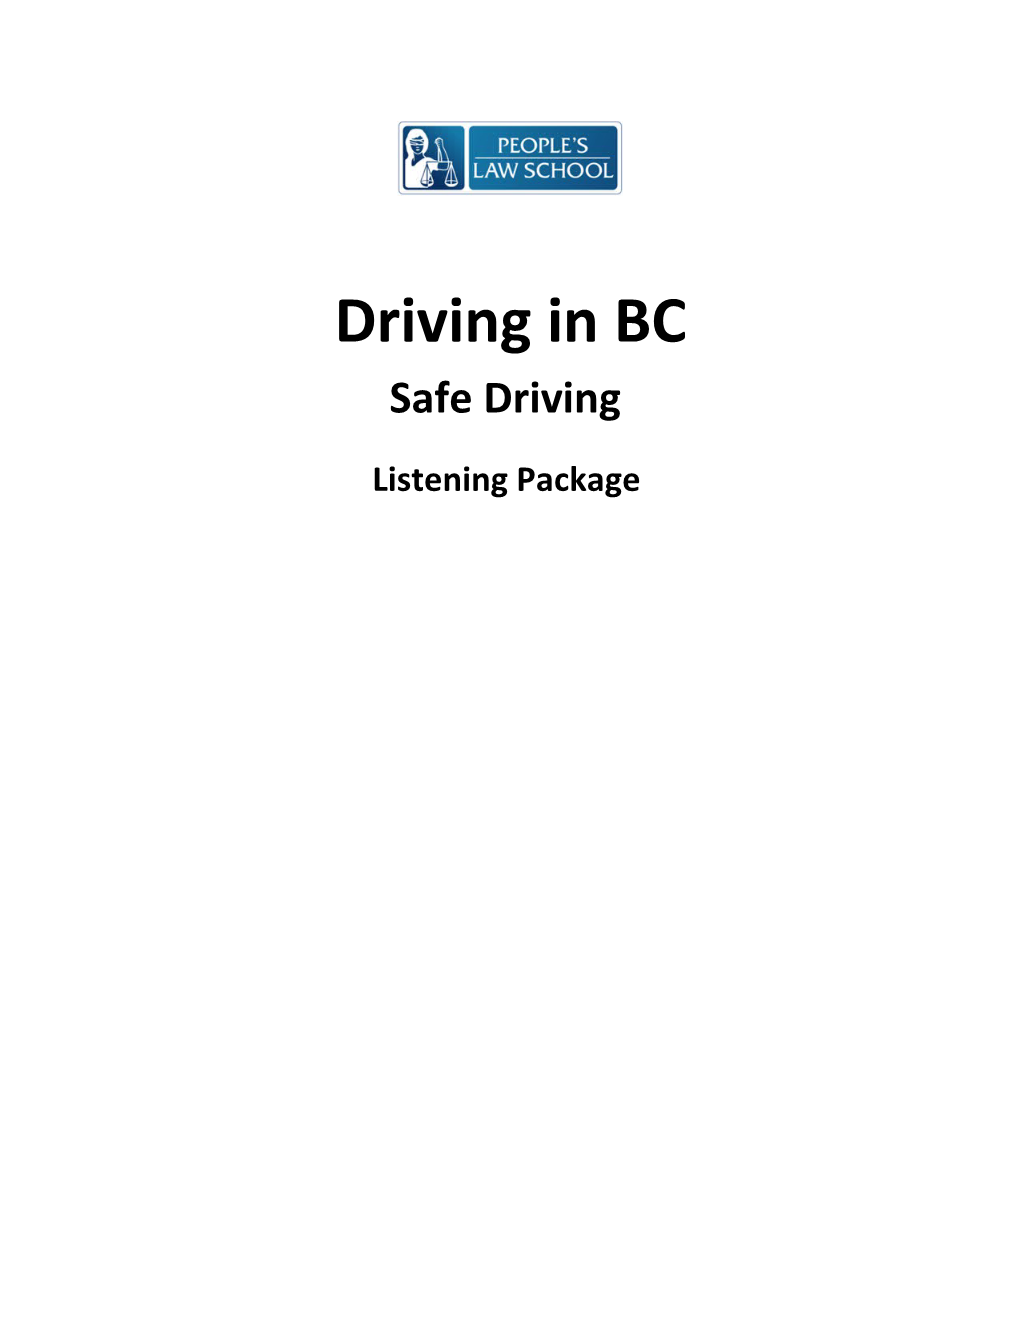 Driving in BC Safe Driving